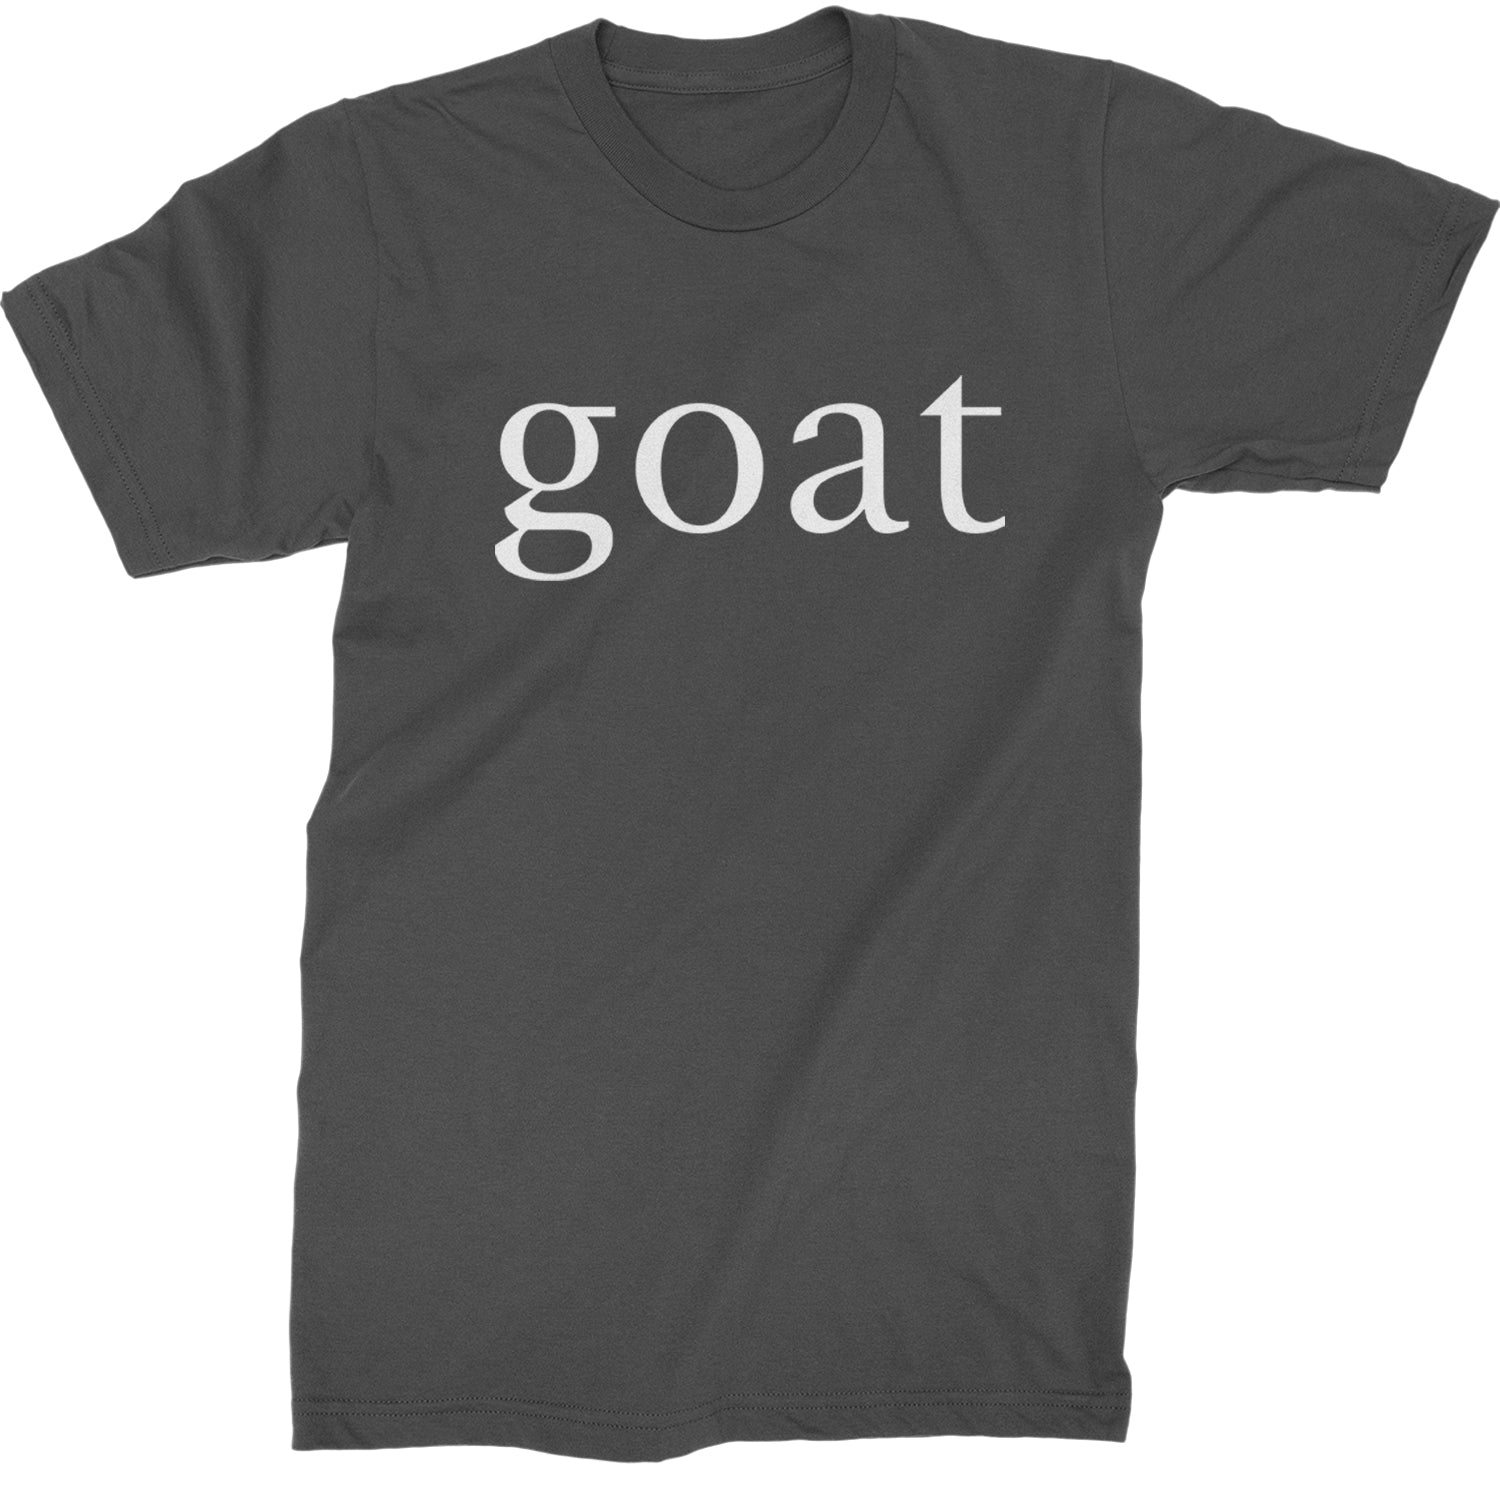 GOAT - Greatest Of All Time  Mens T-shirt Black